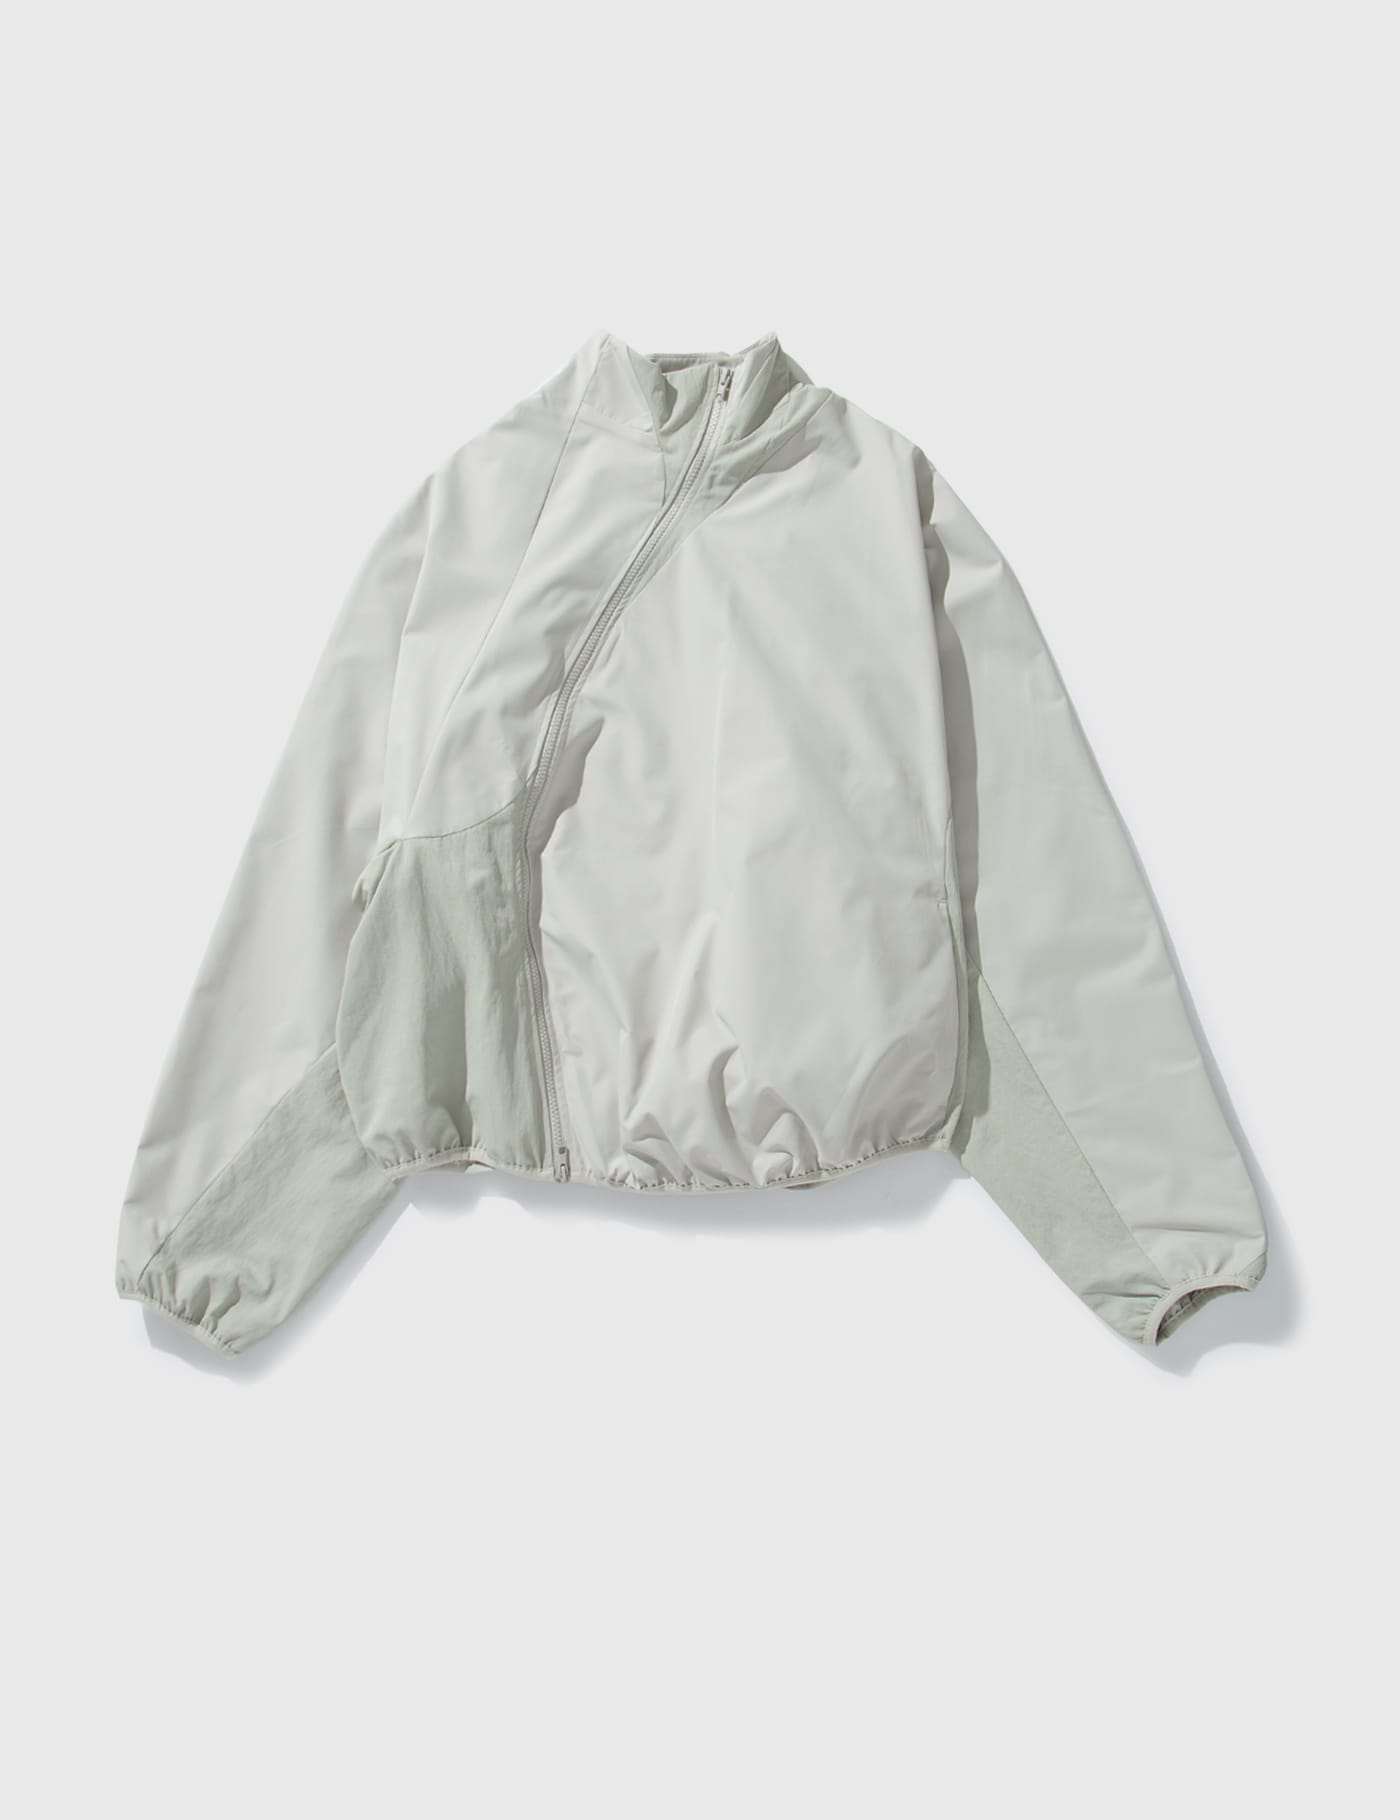 POST ARCHIVE FACTION (PAF) - 4.0+ Technical Jacket Right | HBX - Globally  Curated Fashion and Lifestyle by Hypebeast